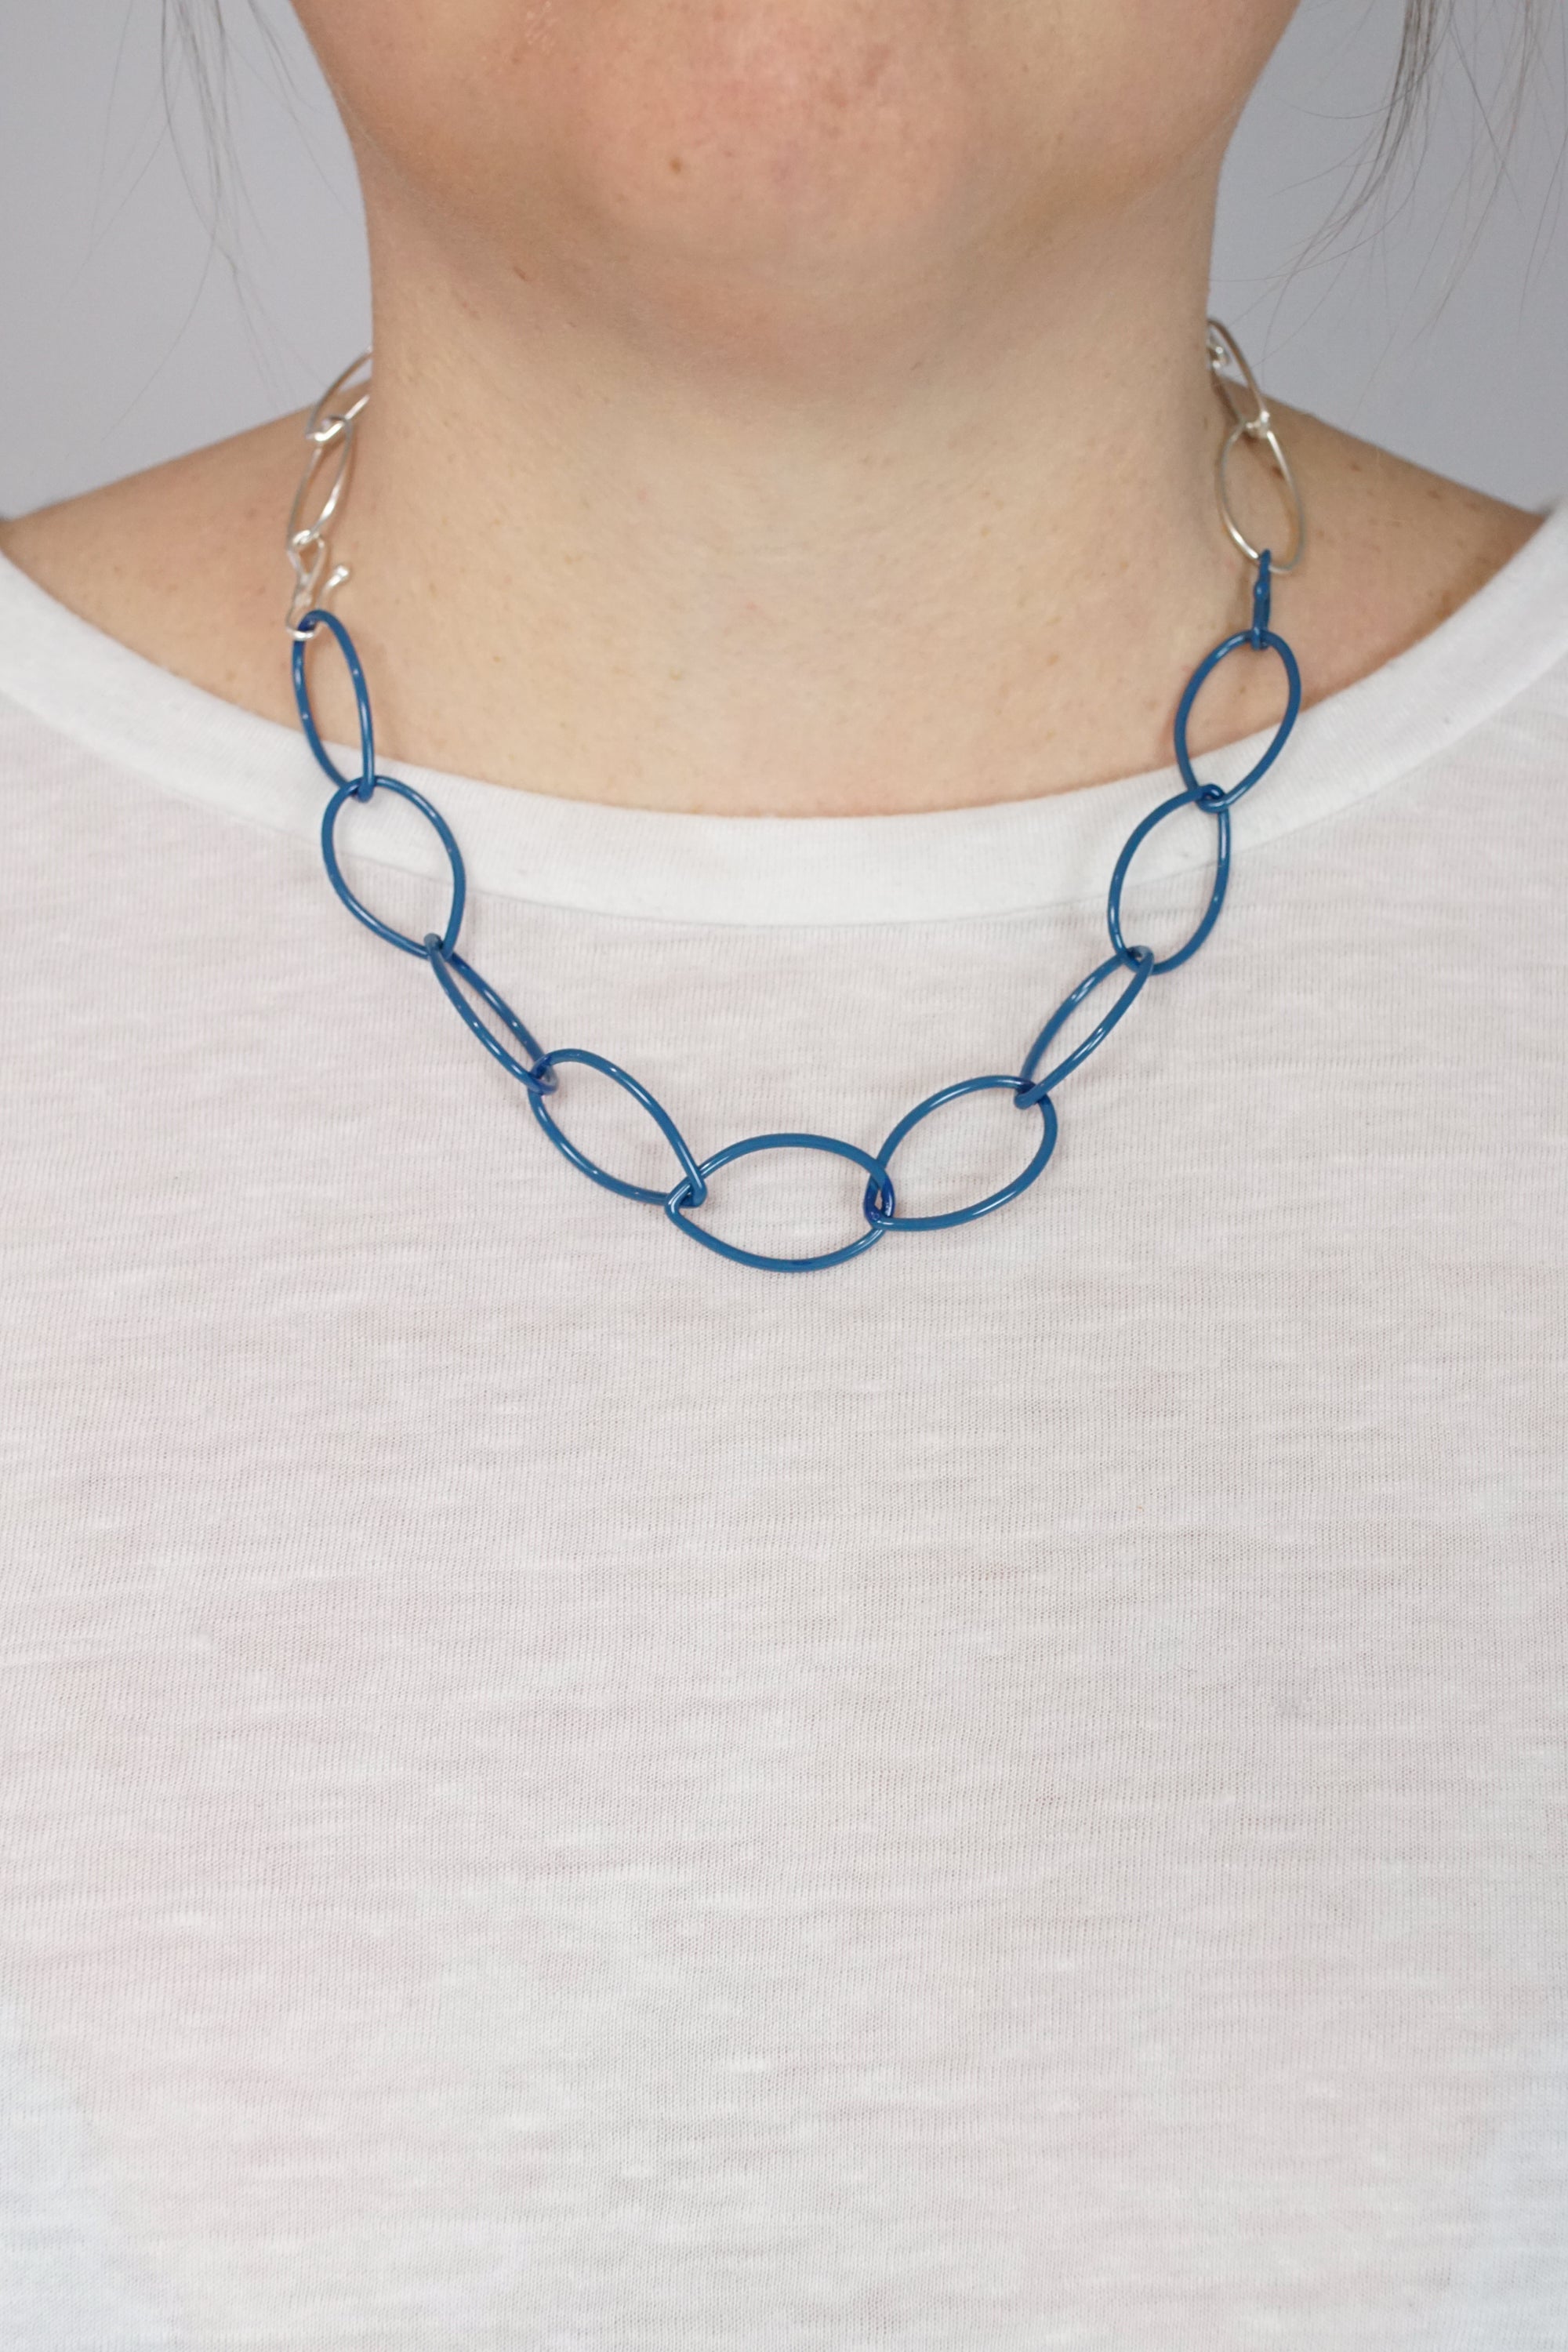 Audrey necklace in Silver and Azure Blue